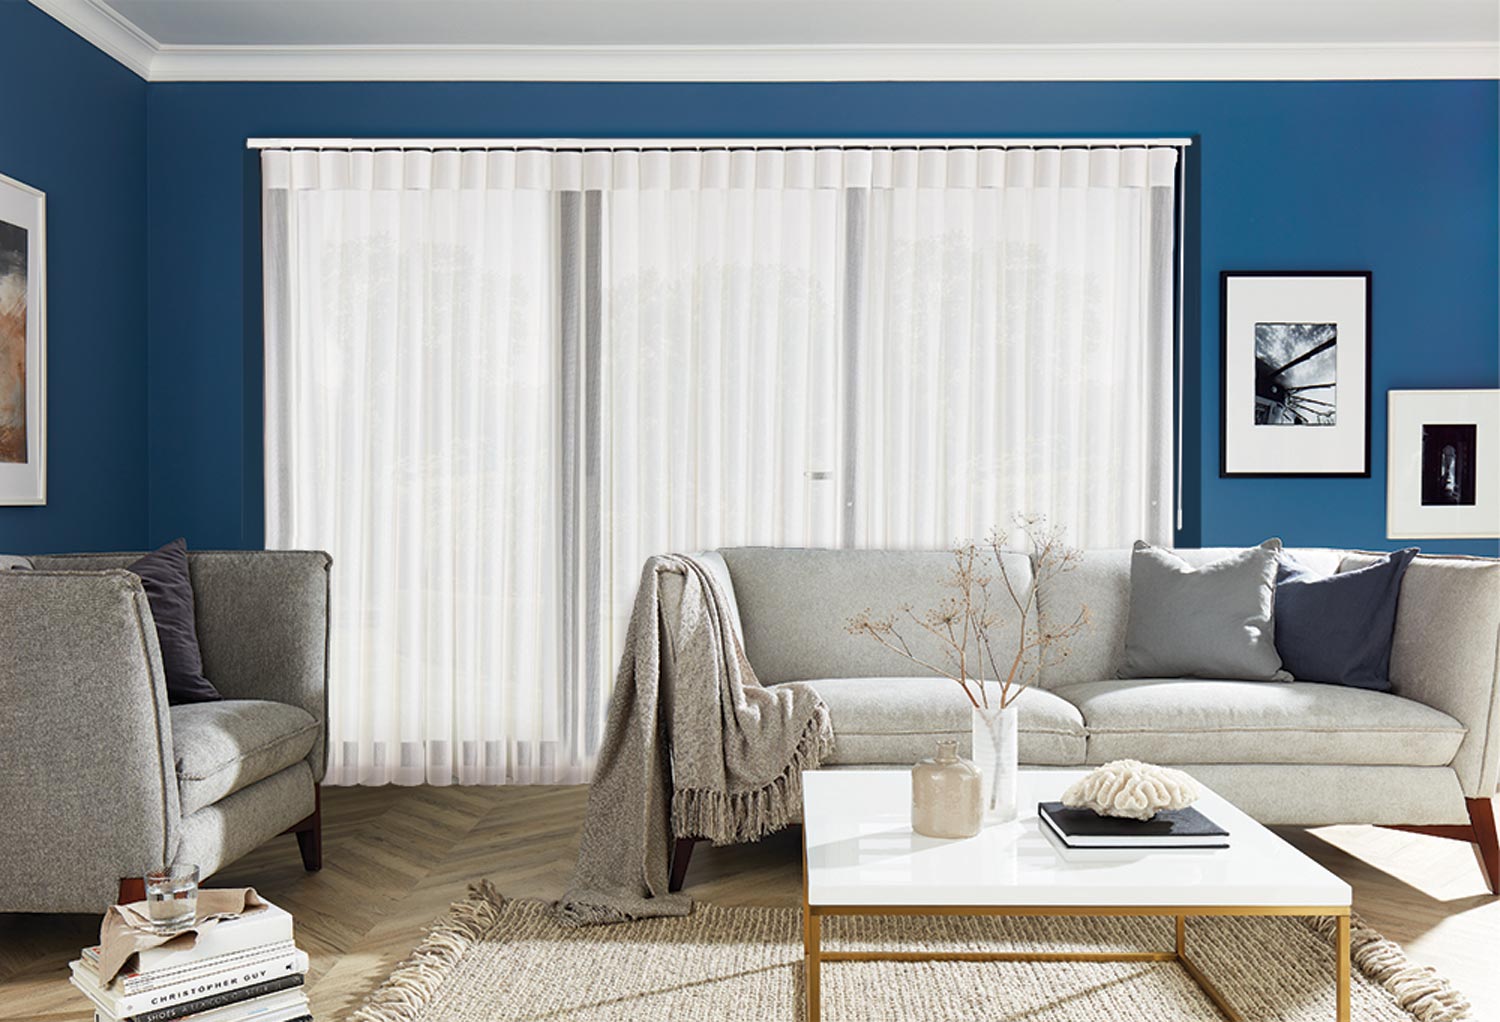 								 Allusion Blinds Glasgow 								 																		